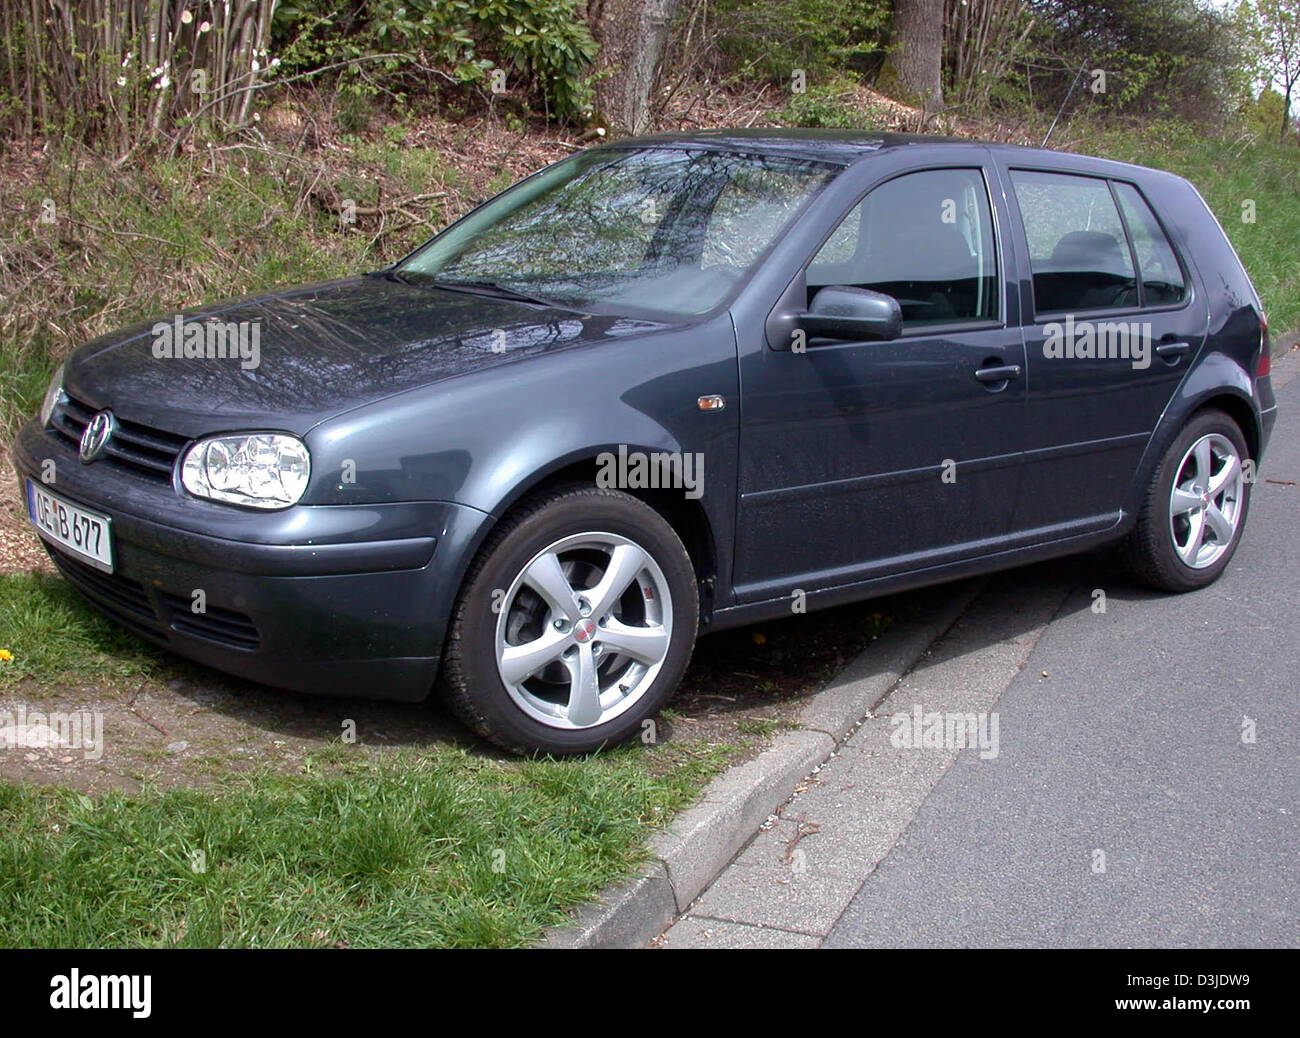 gjorde det essens Bering strædet dpa) - The picture shows a VW Golf, which was previoulsy owned by the new  Pope Benedict XVI in Duesseldorf, Germany, 28 April 2005. According to  first allegations, the six-year old Volkswagen (